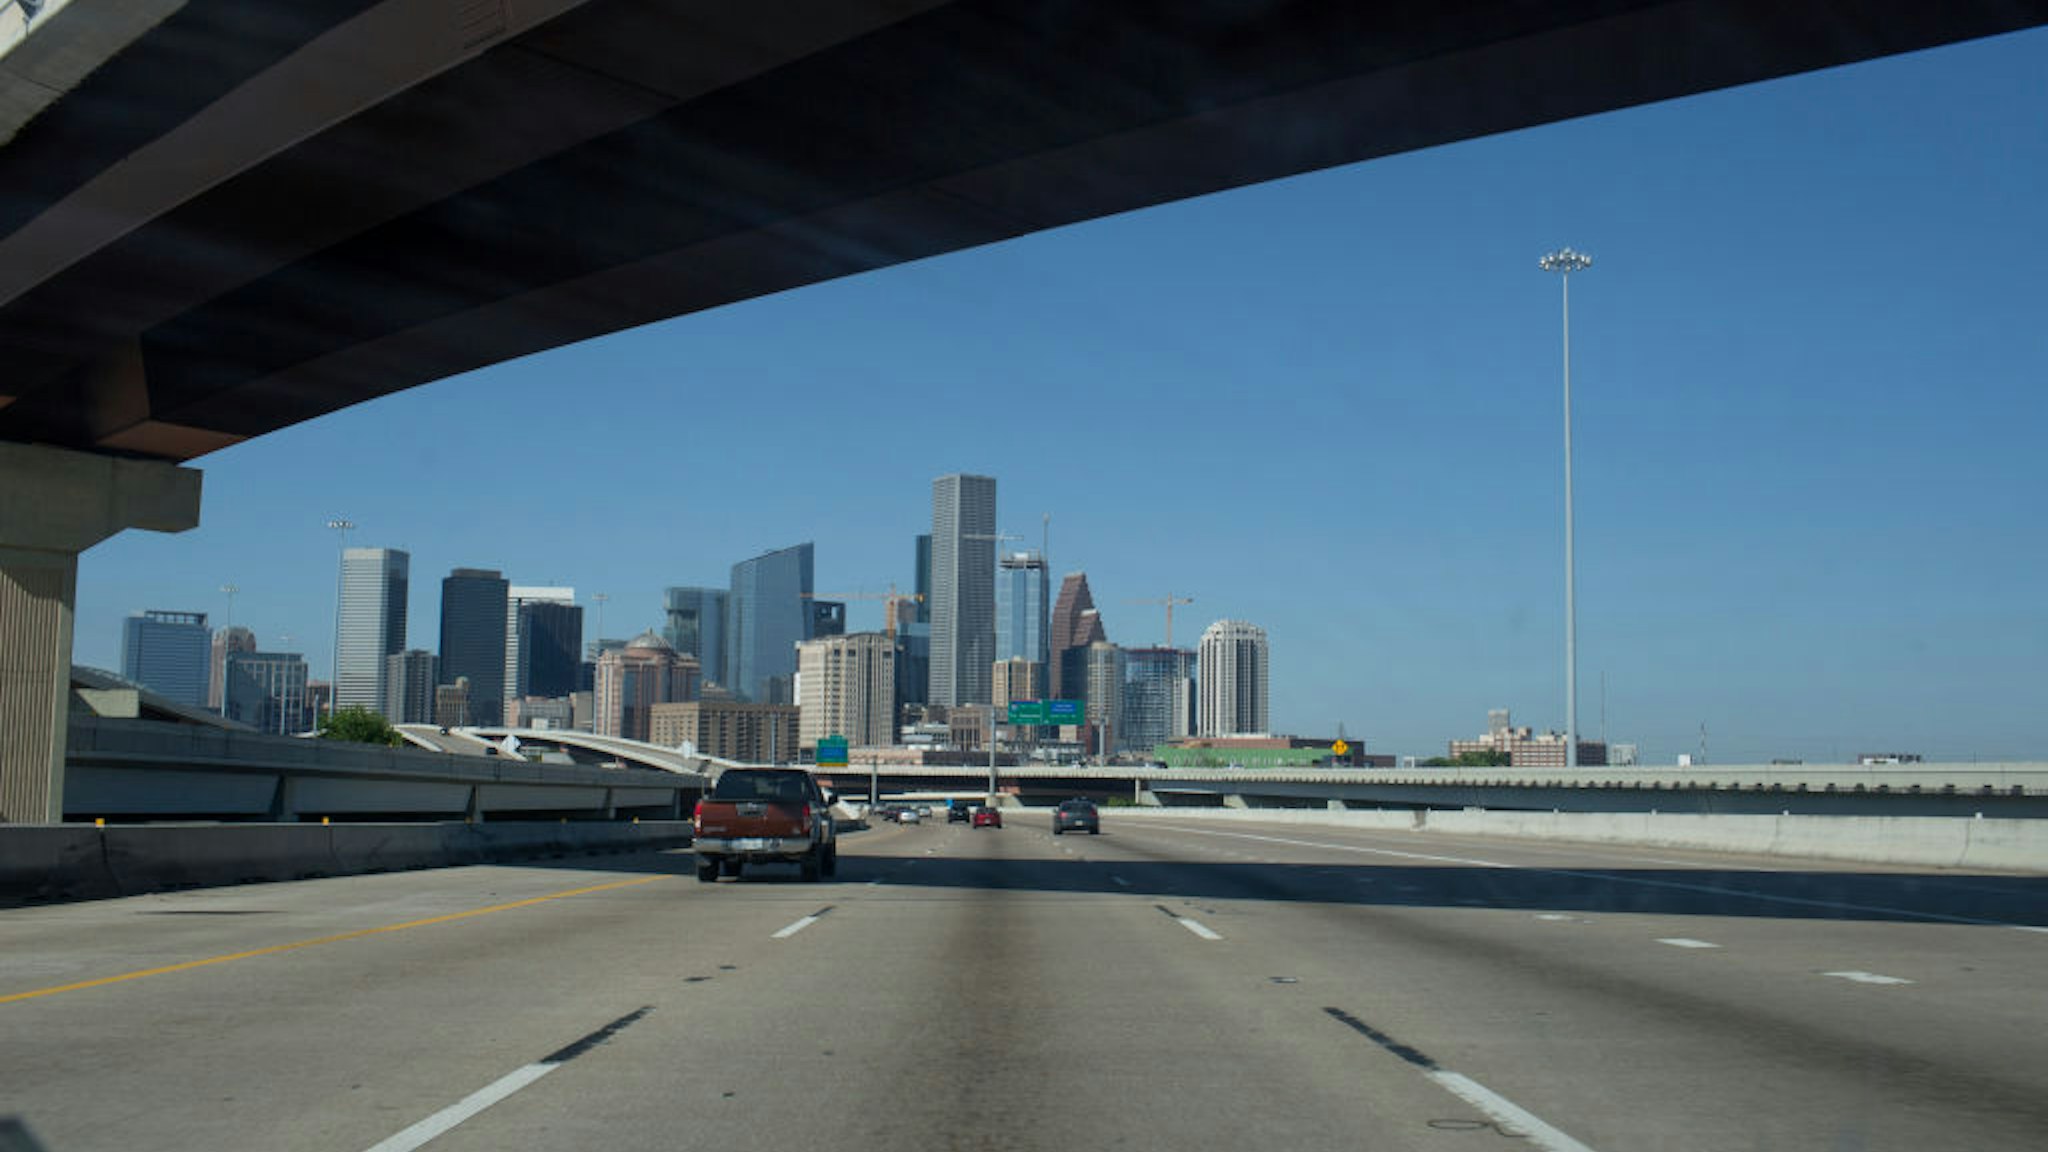 The Houston skyline appears above an intersection of freeways approaching from the east on April 11, 2021 in Houston, Texas.